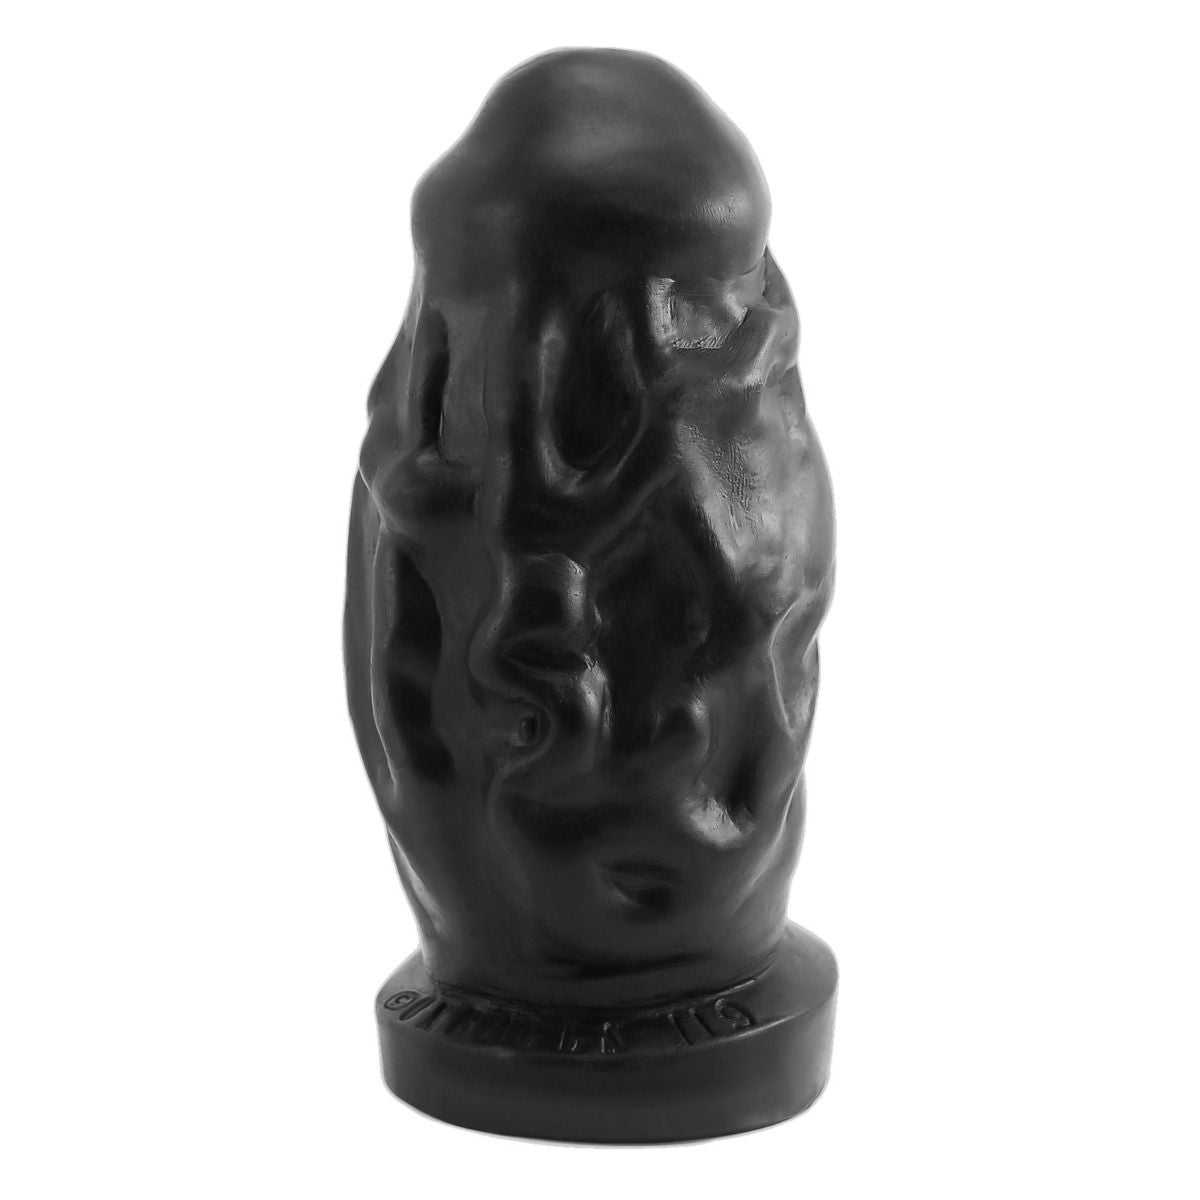 Prowler RED ROIDS Butt Plug Silicone Black